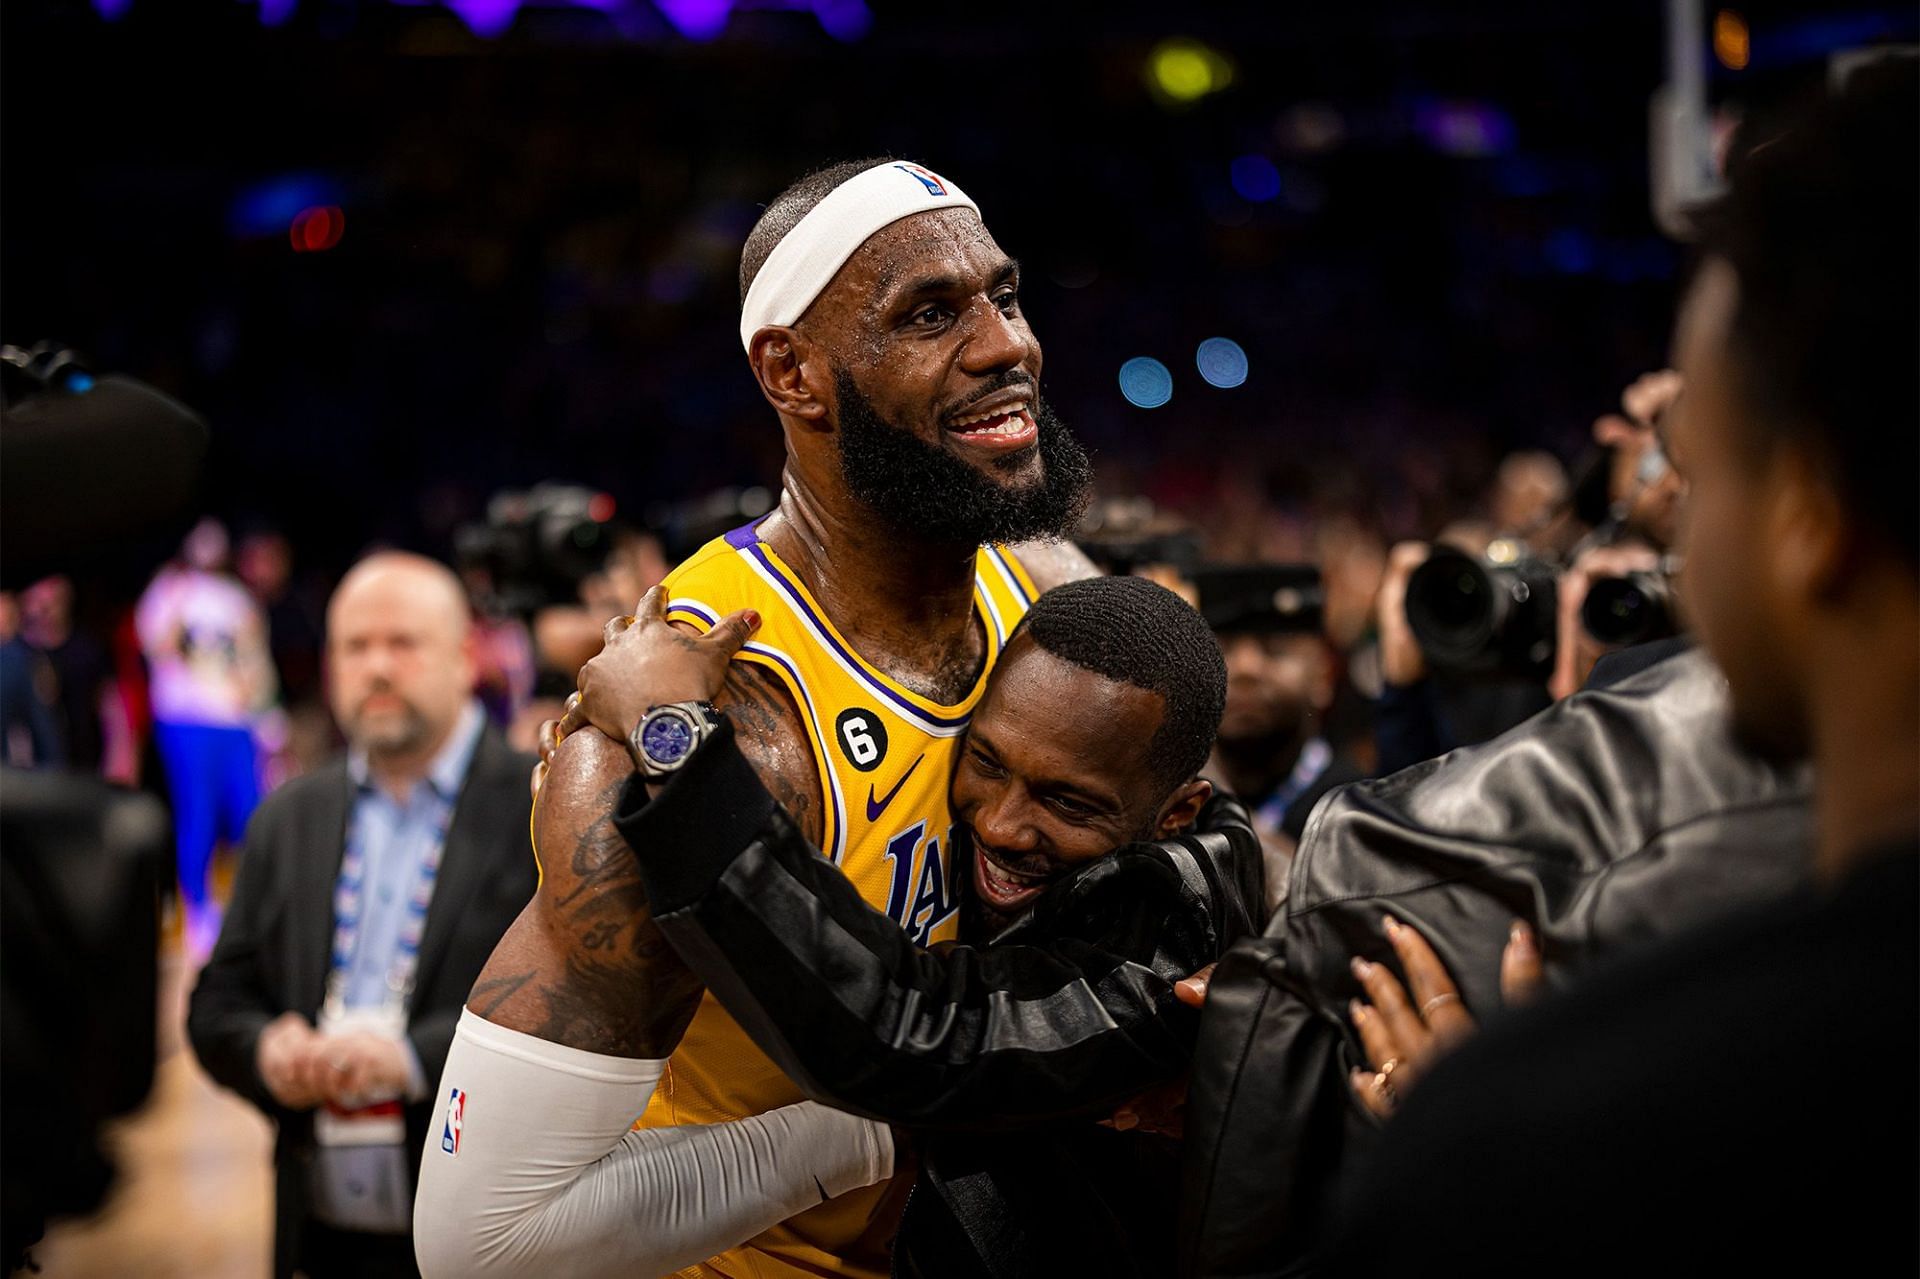 LA Lakers star forward LeBron James and his agent Rich Paul